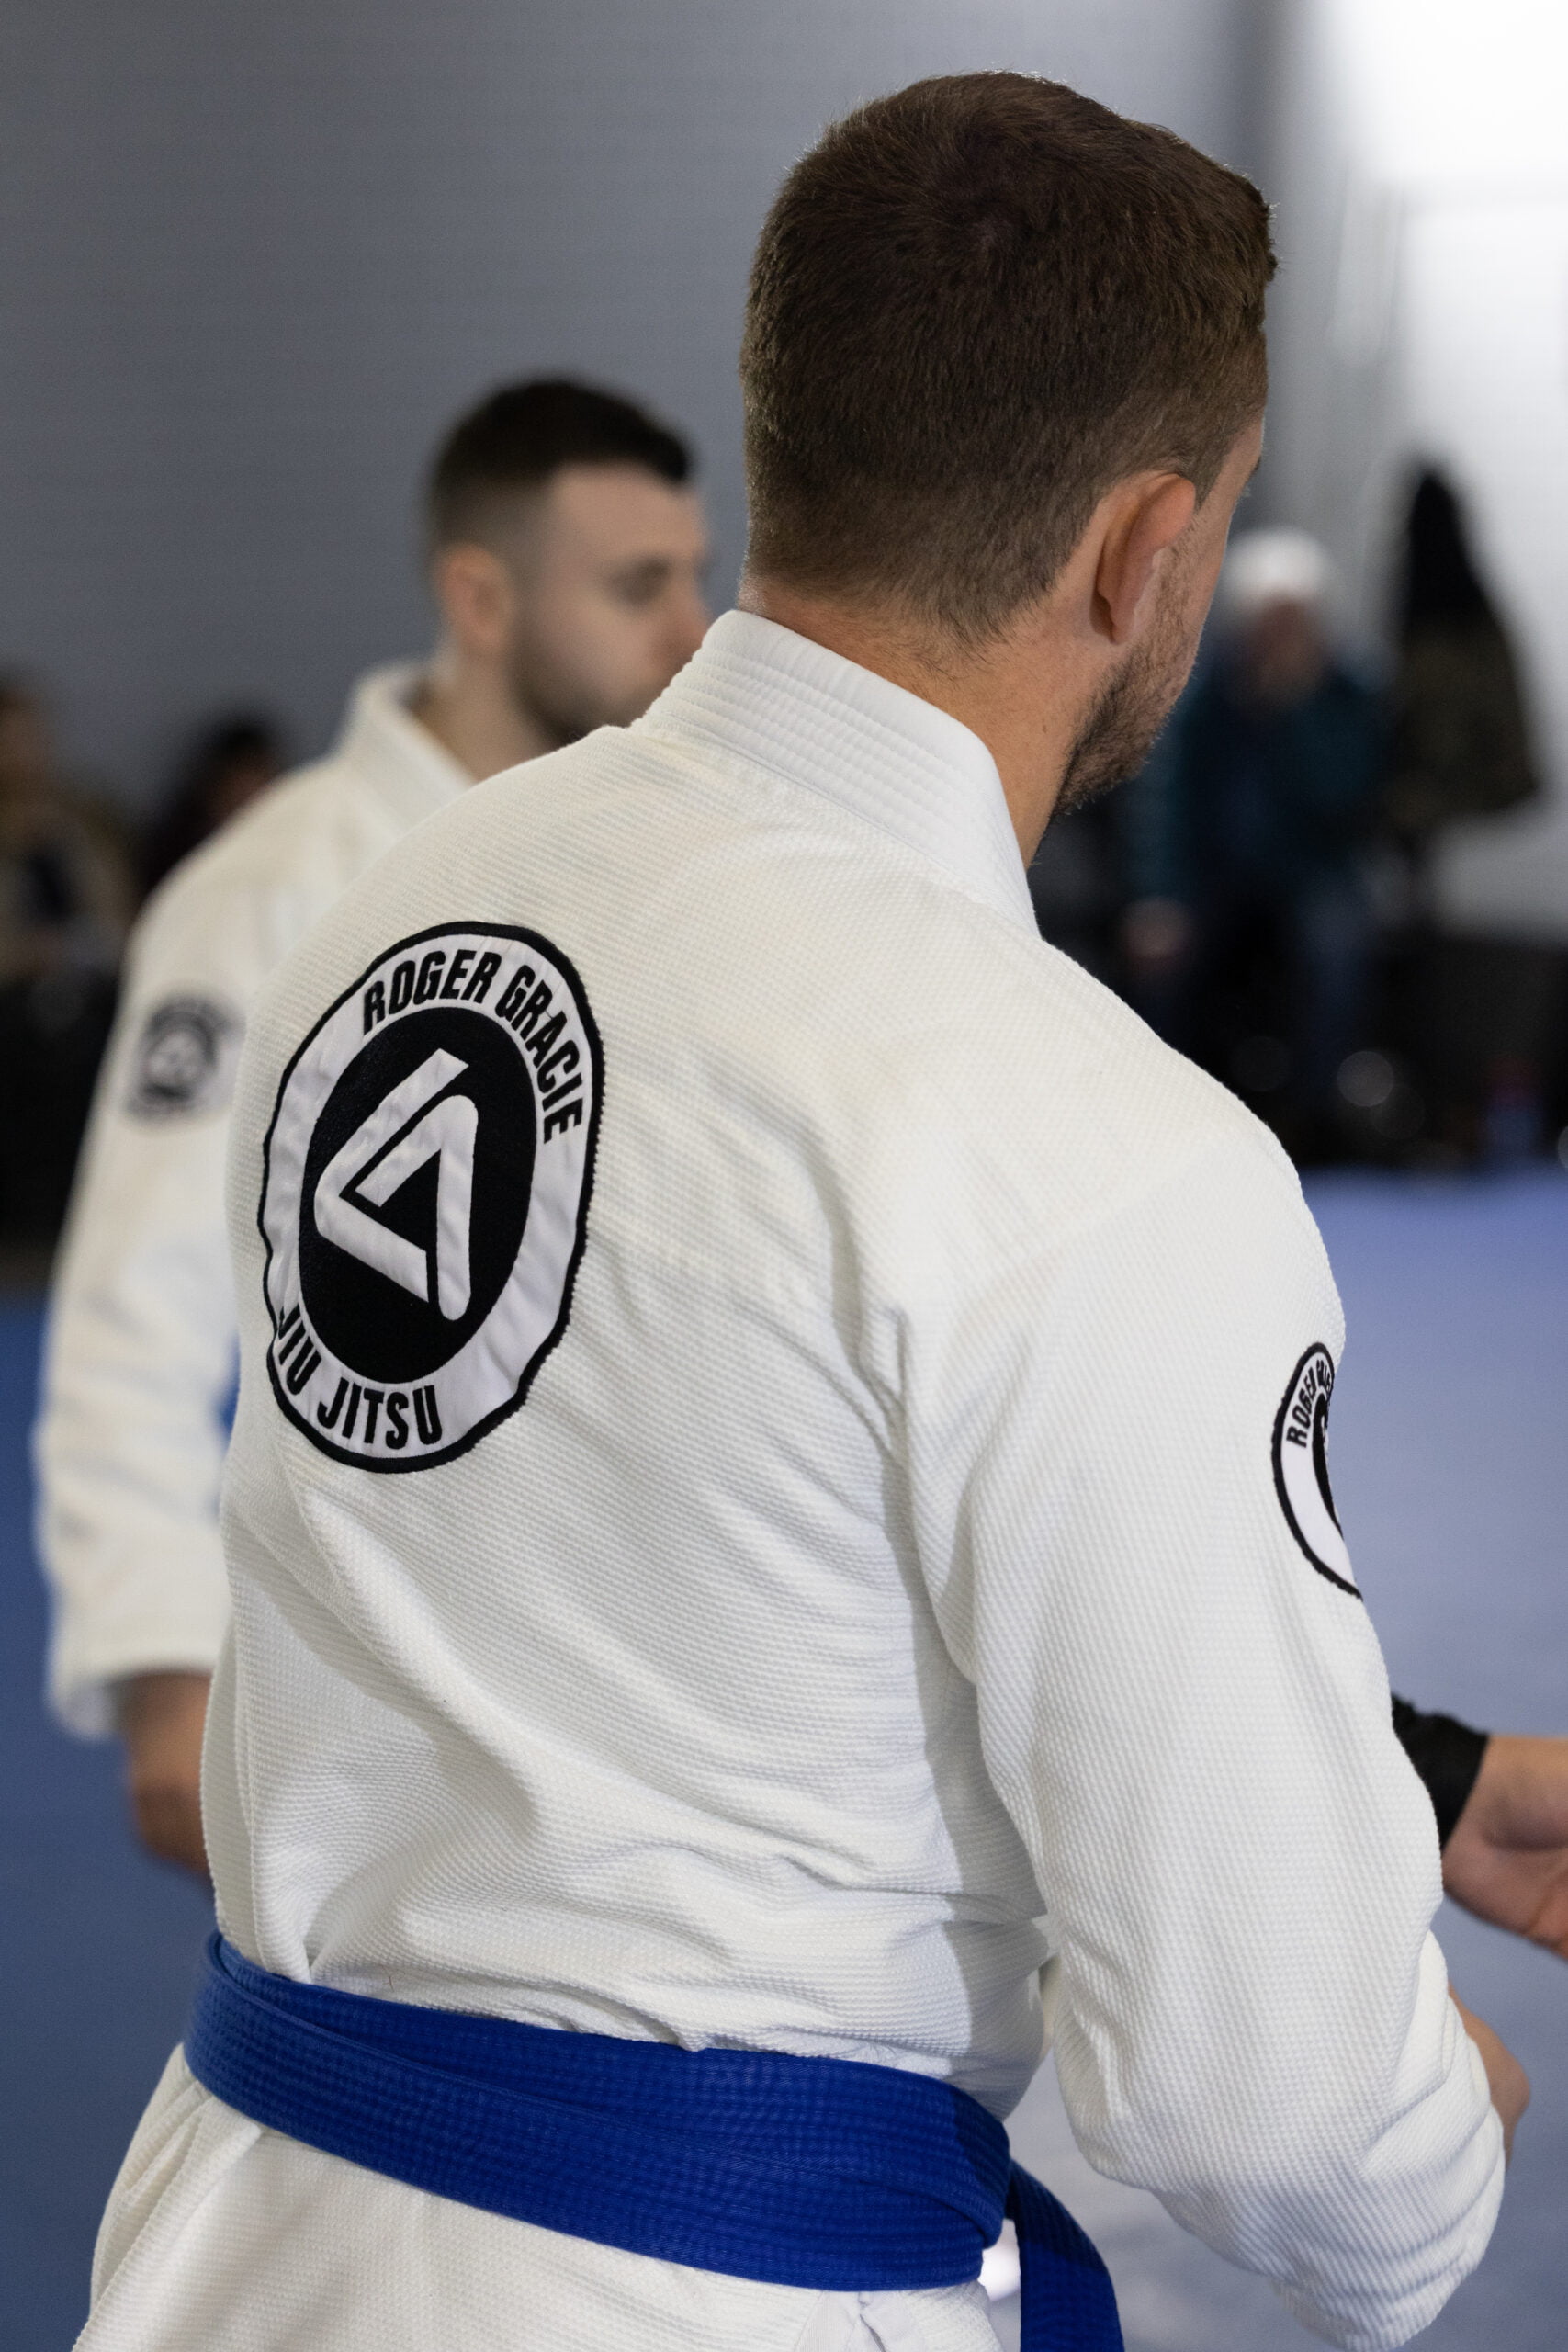 The back of a Roger Gracie blue belt assistant coach overseeing the kids train.